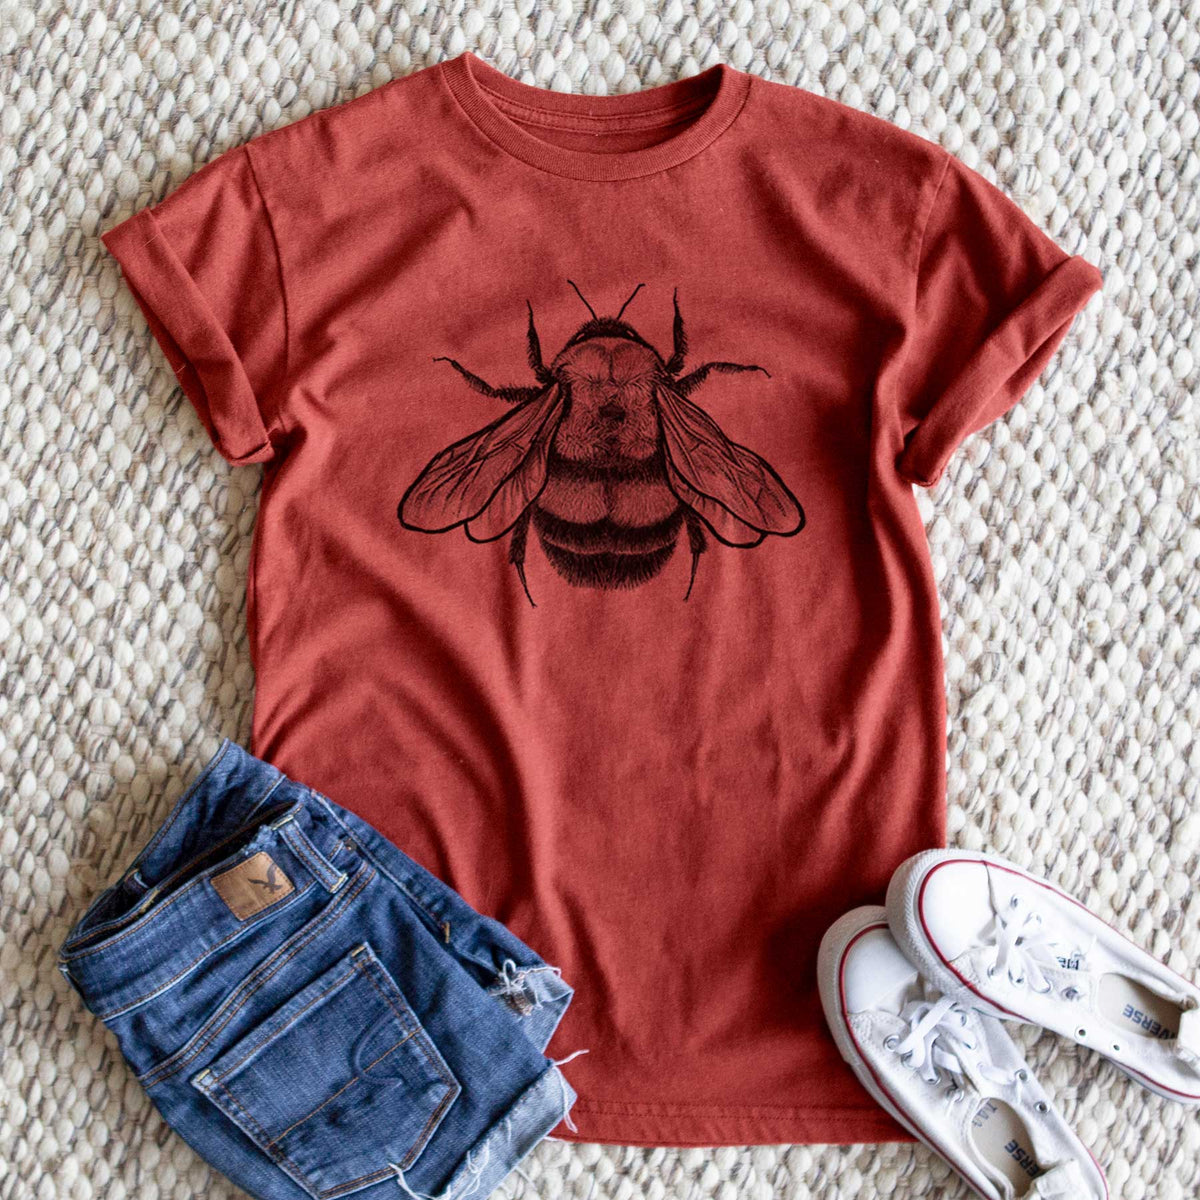 Bombus Affinis - Rusty-Patched Bumble Bee - Unisex Recycled Eco Tee  - CLOSEOUT - FINAL SALE